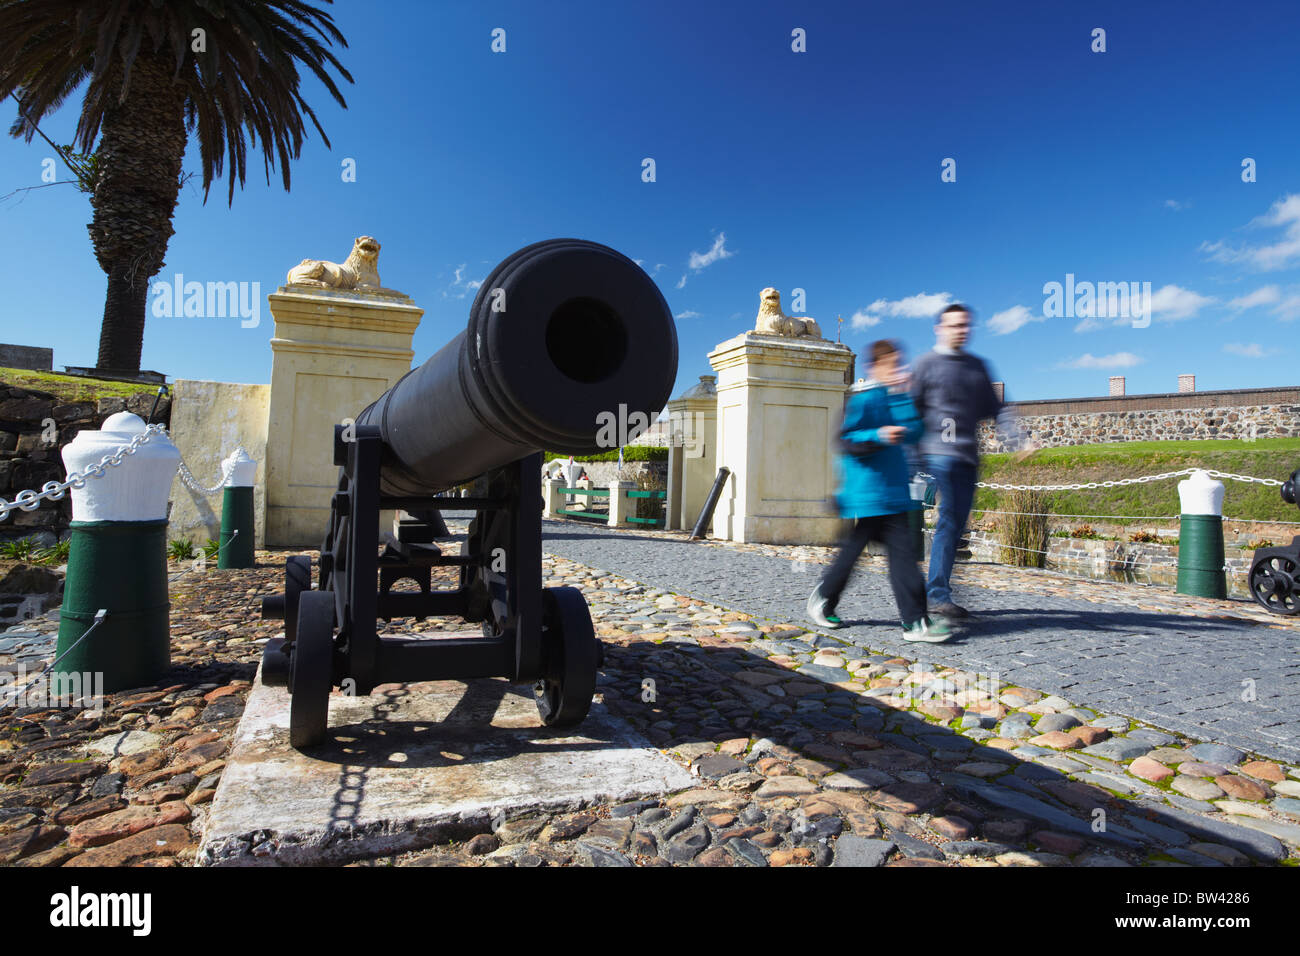 People walking past cannon outside Castle of Good Hope, City Bowl, Cape Town, Western Cape, South Africa Stock Photo